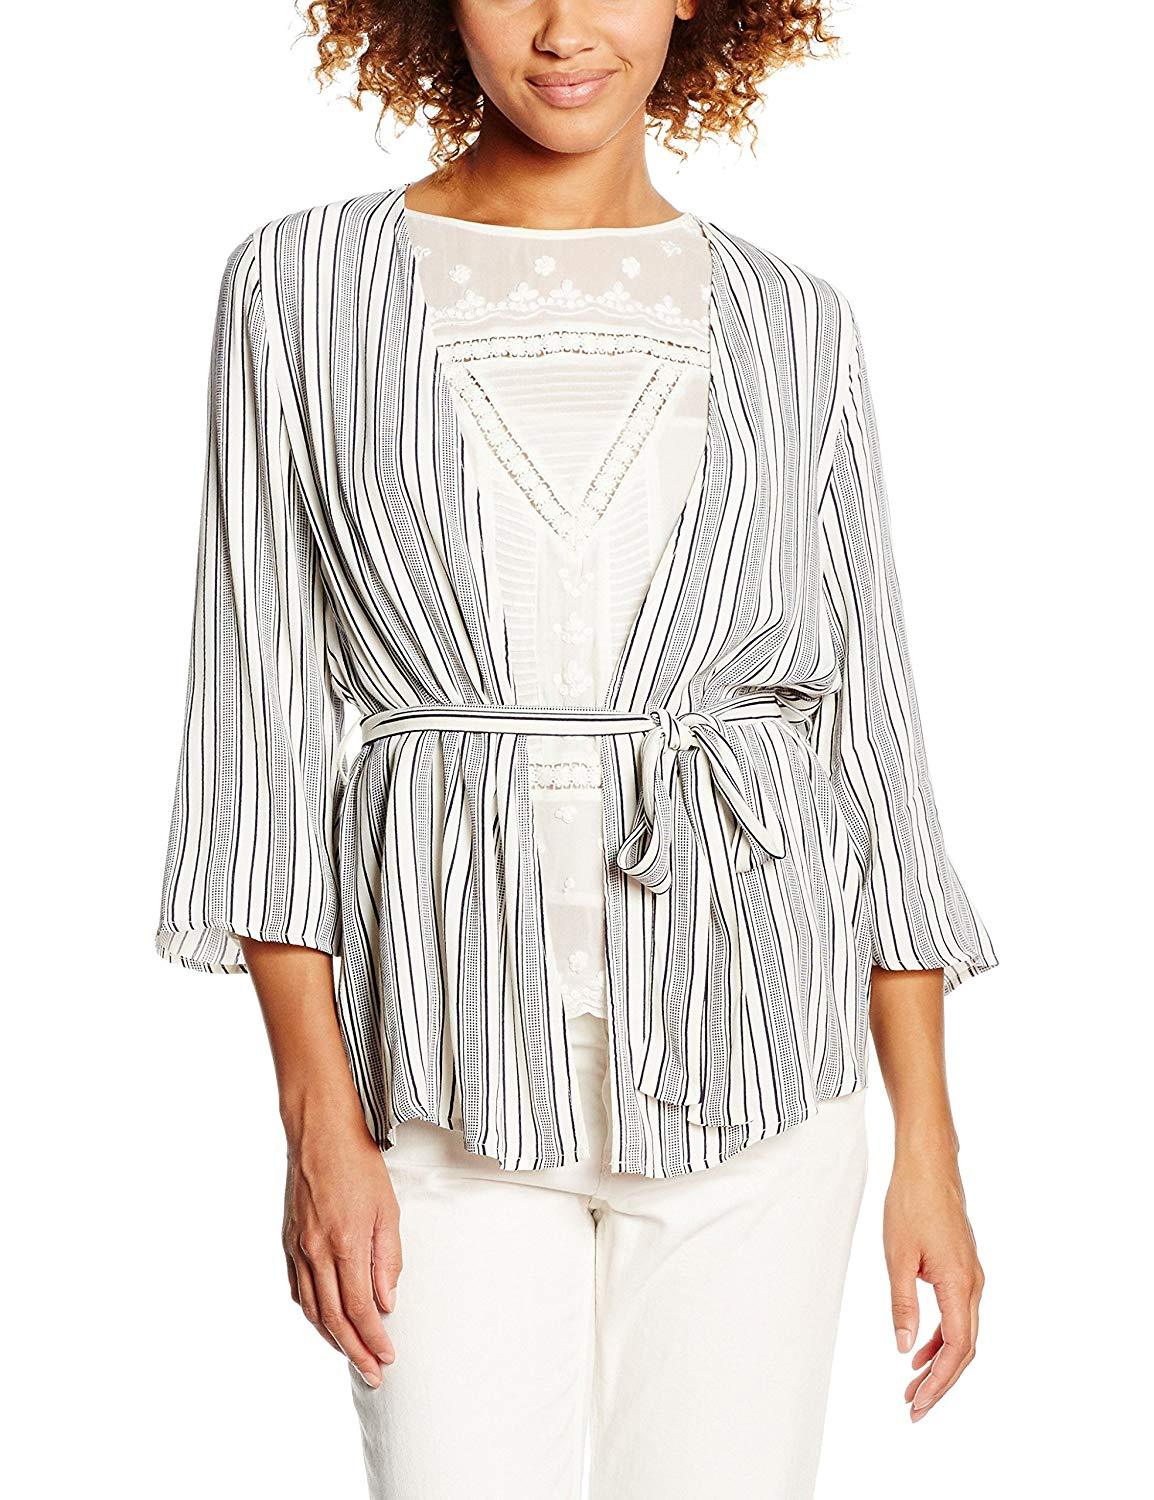 New Look Womens Alfie Striped Belted Kimono - Stockpoint Apparel Outlet